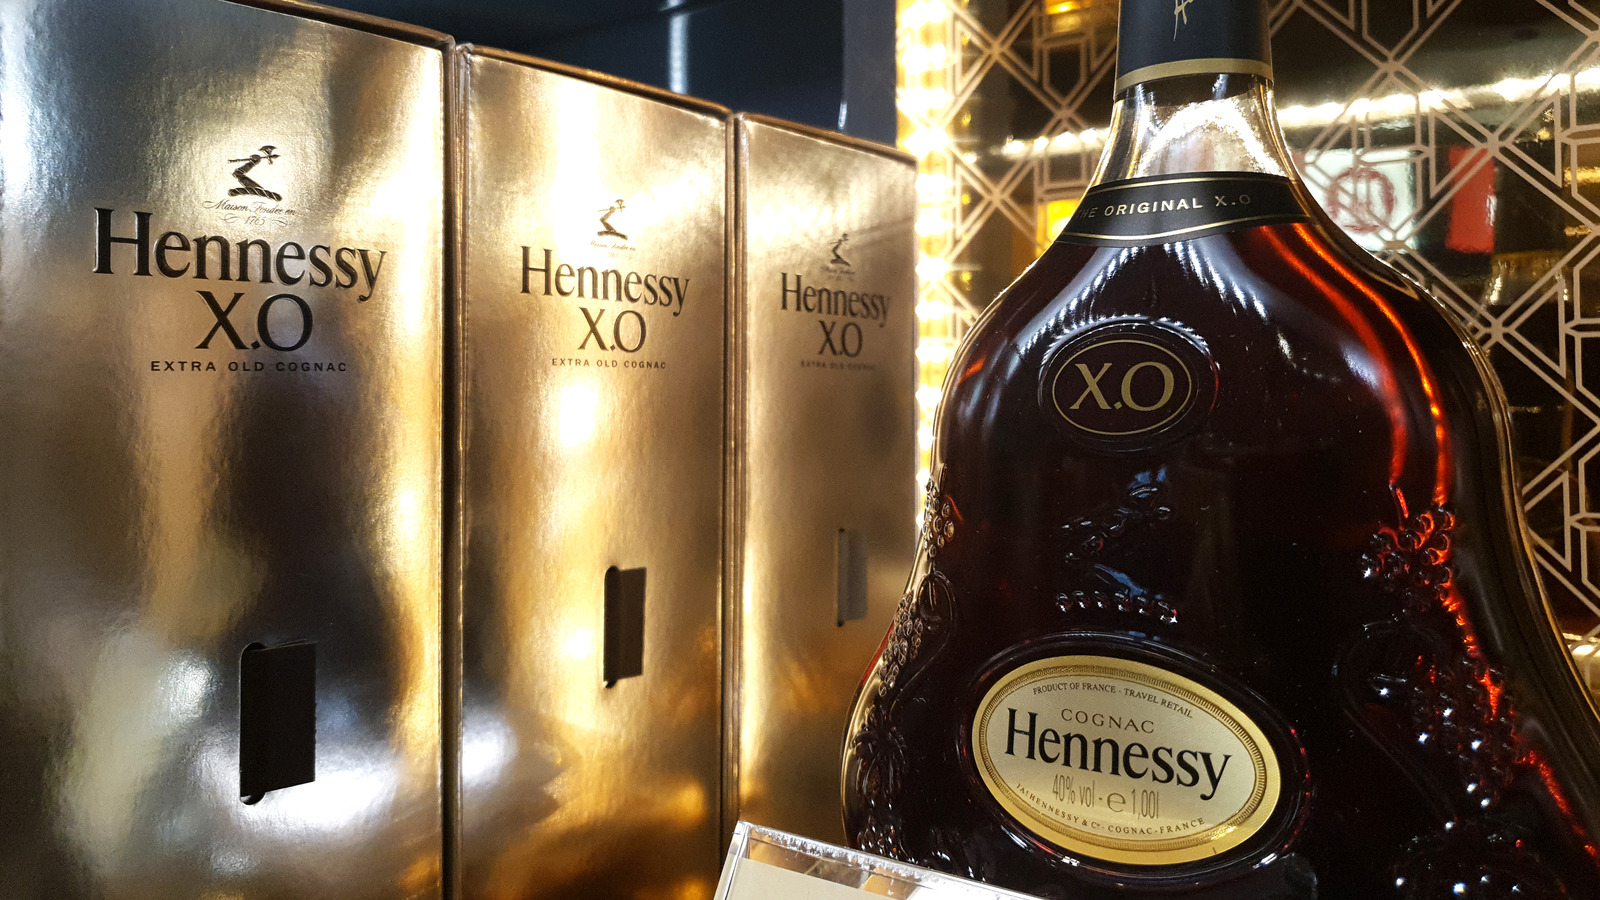 Bottle X.O The Cognac: Guide Ultimate Hennessy